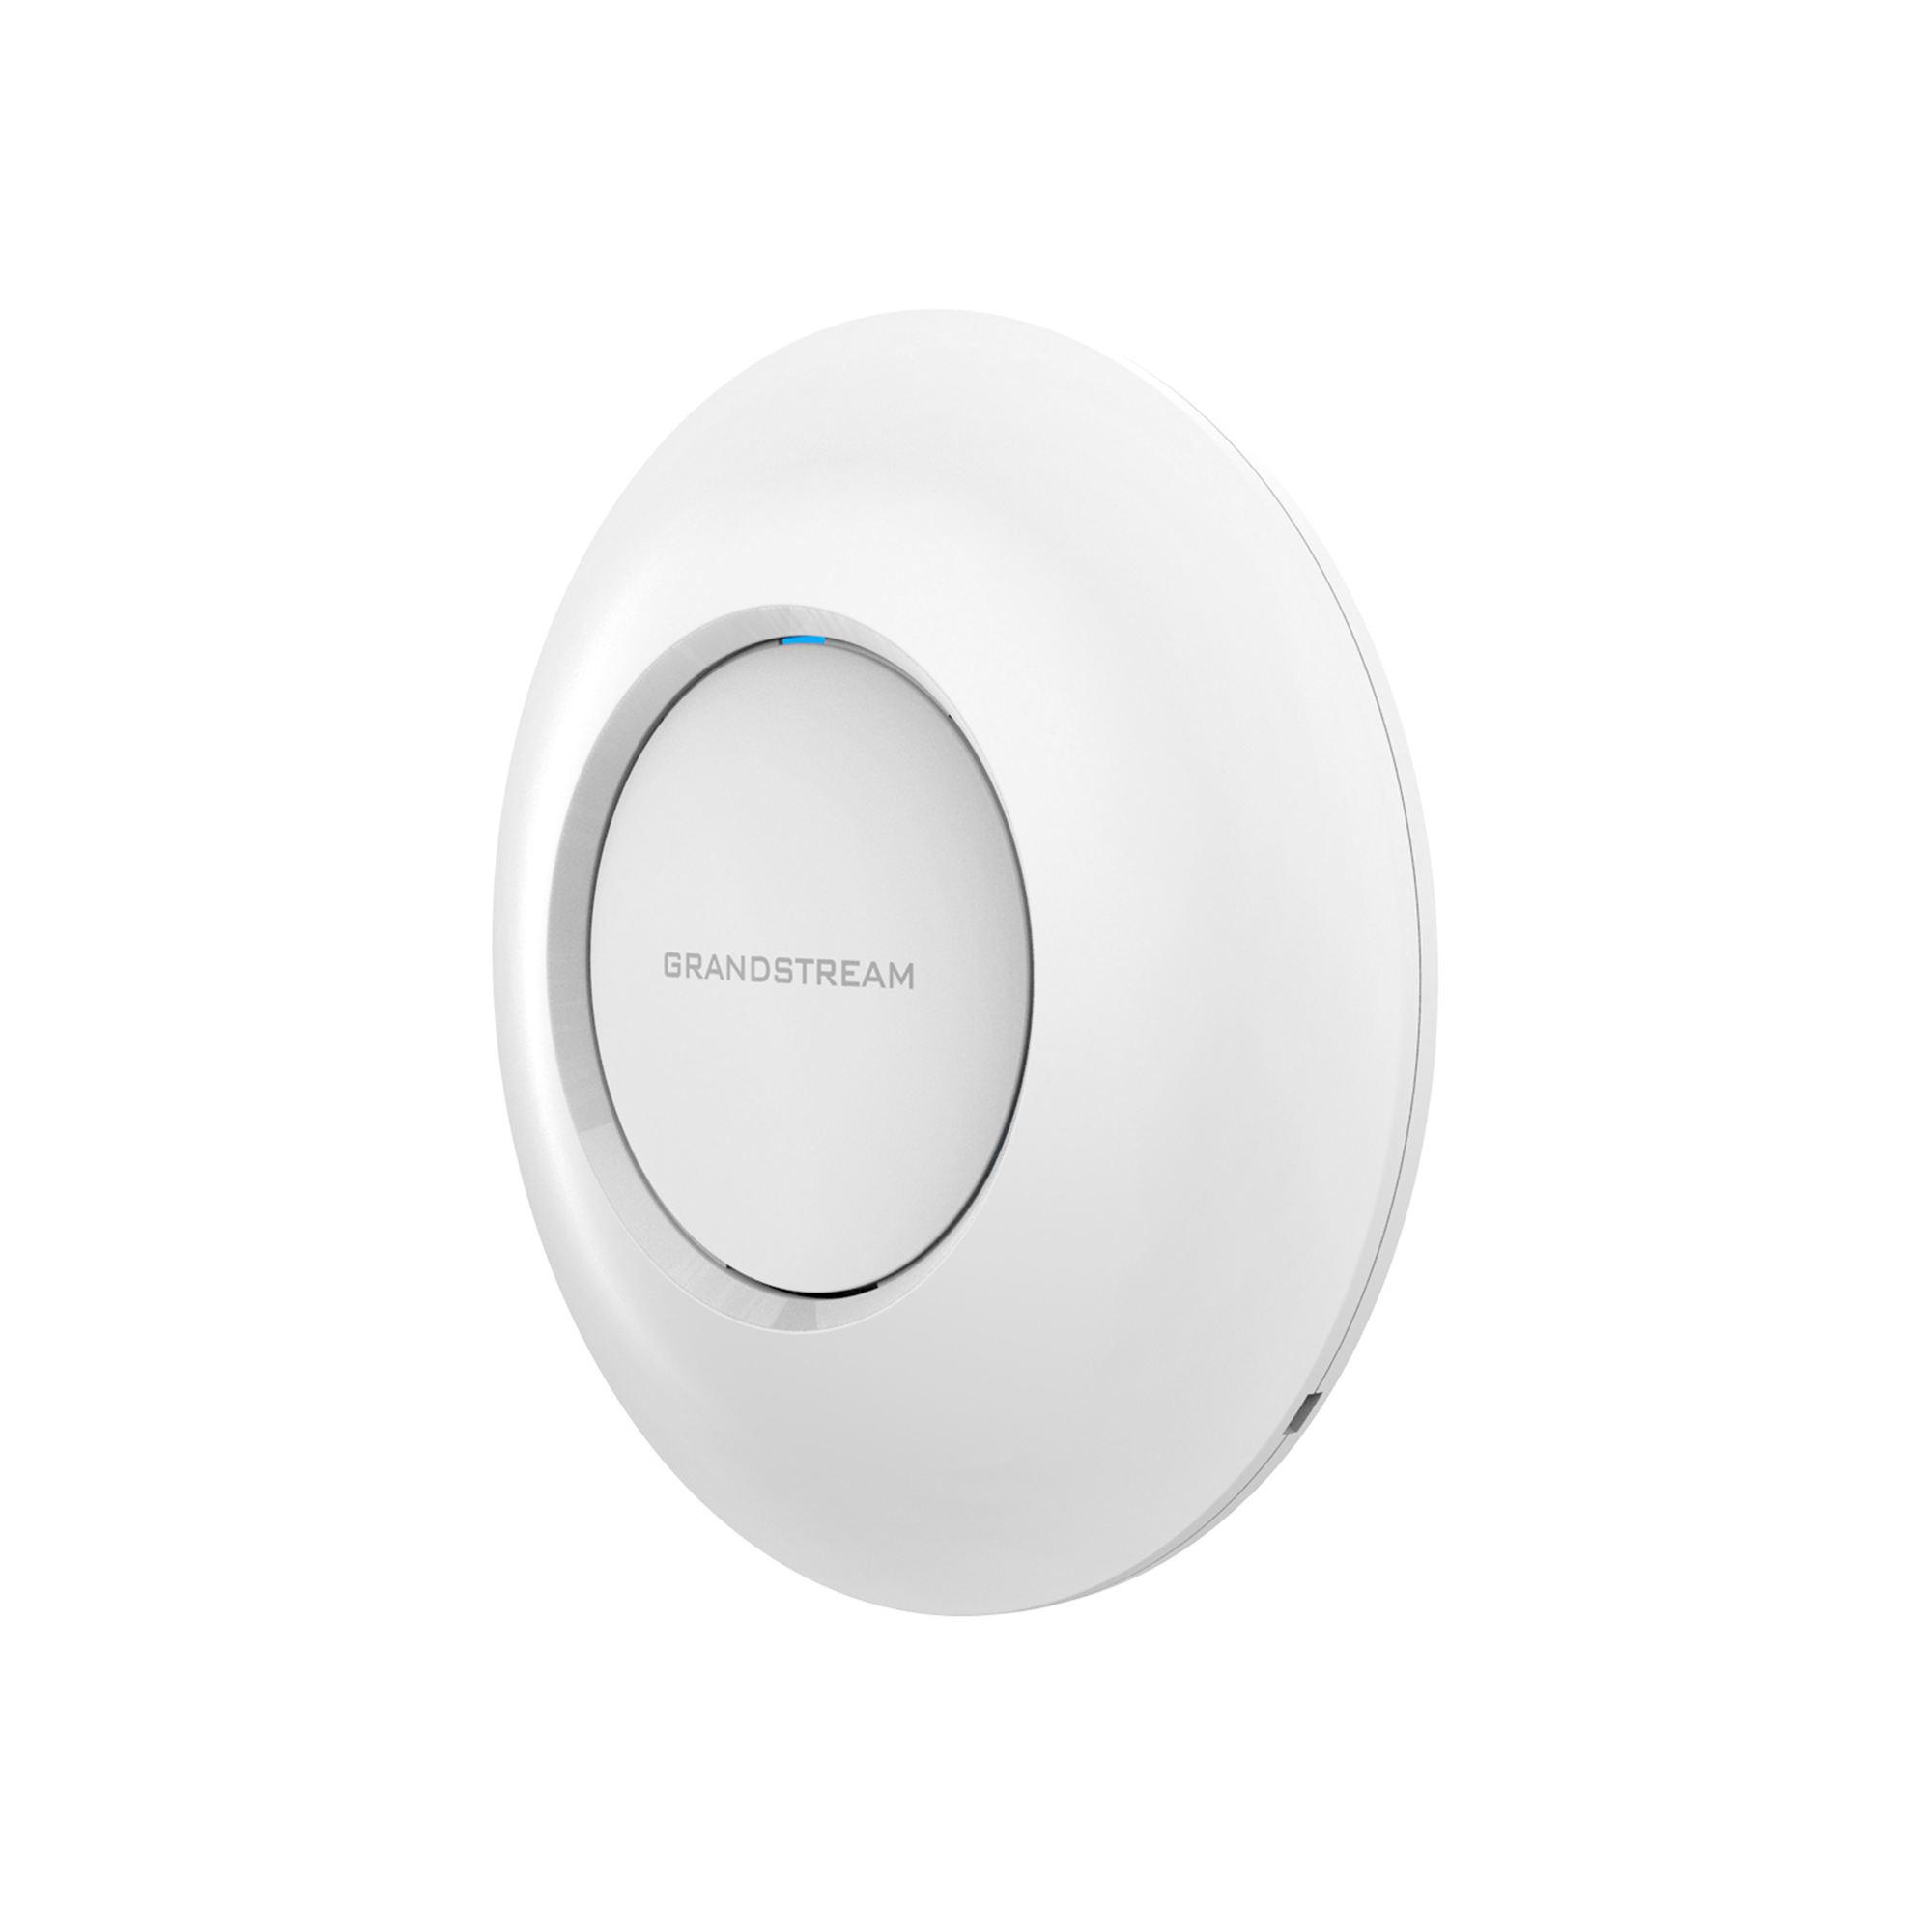 Grandstream GWN7630 Dual Band WiFi Access Point side